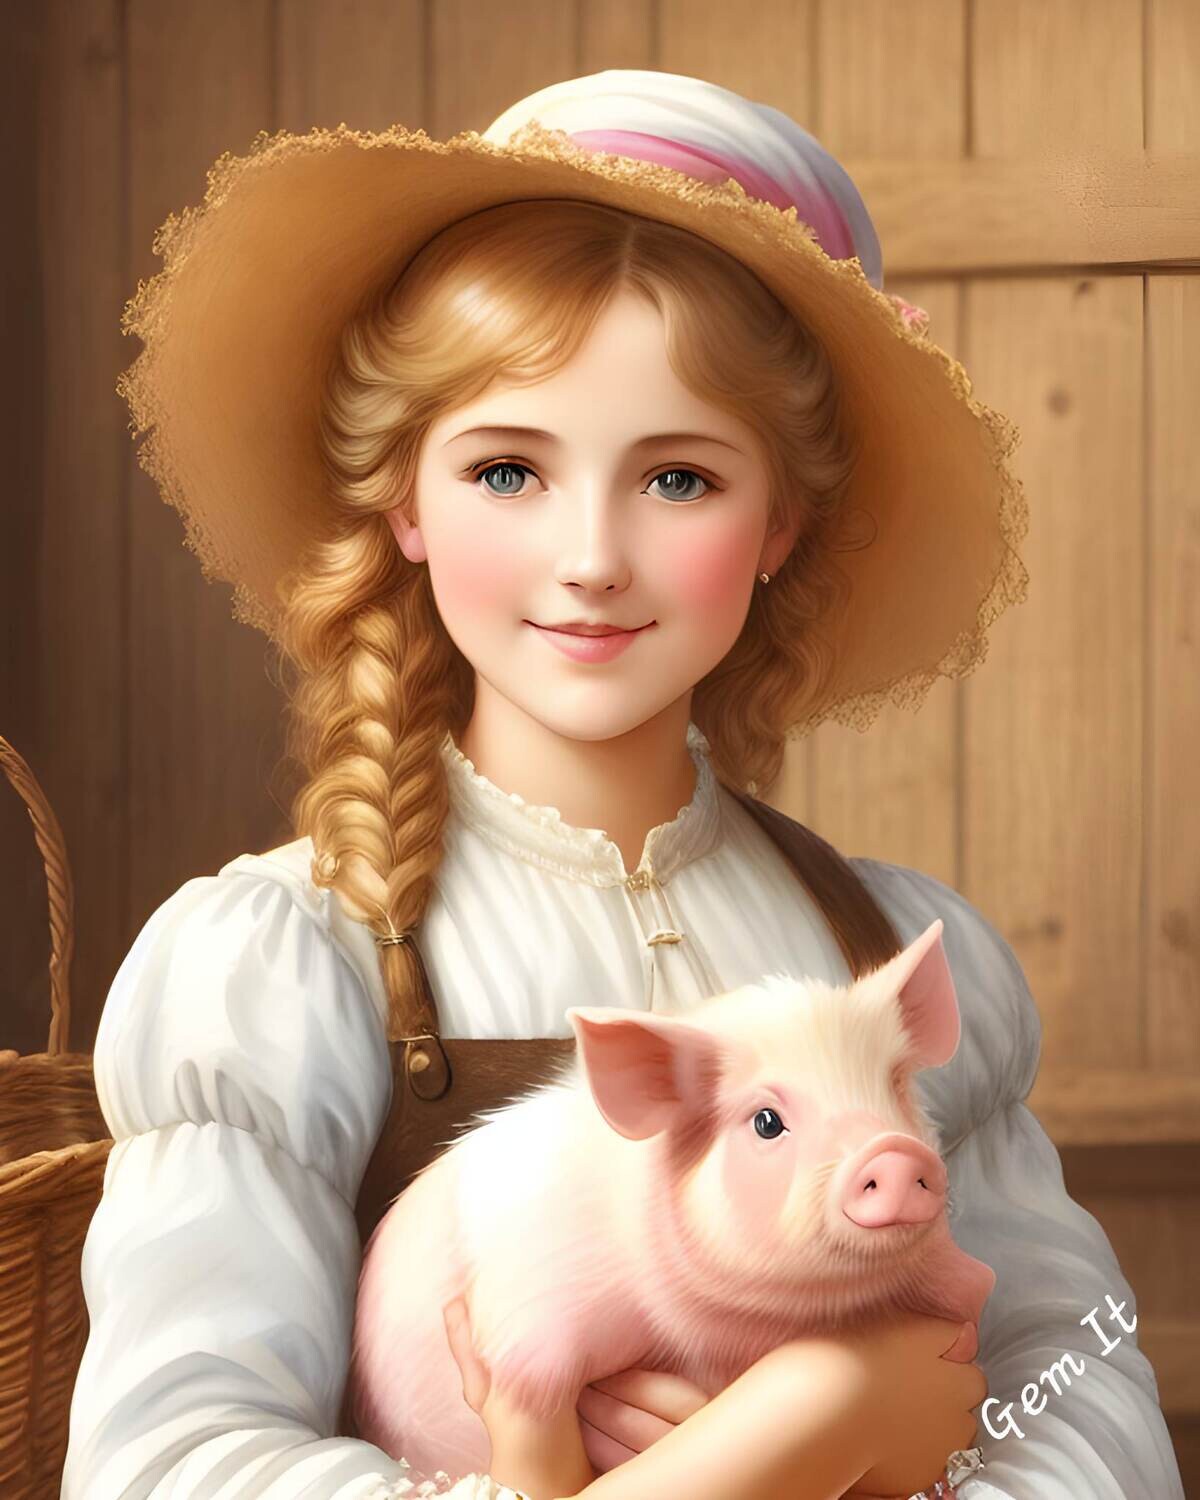 Farm Girl with Pig - Specially ordered for you. Delivery is approximately 4 - 6 weeks.